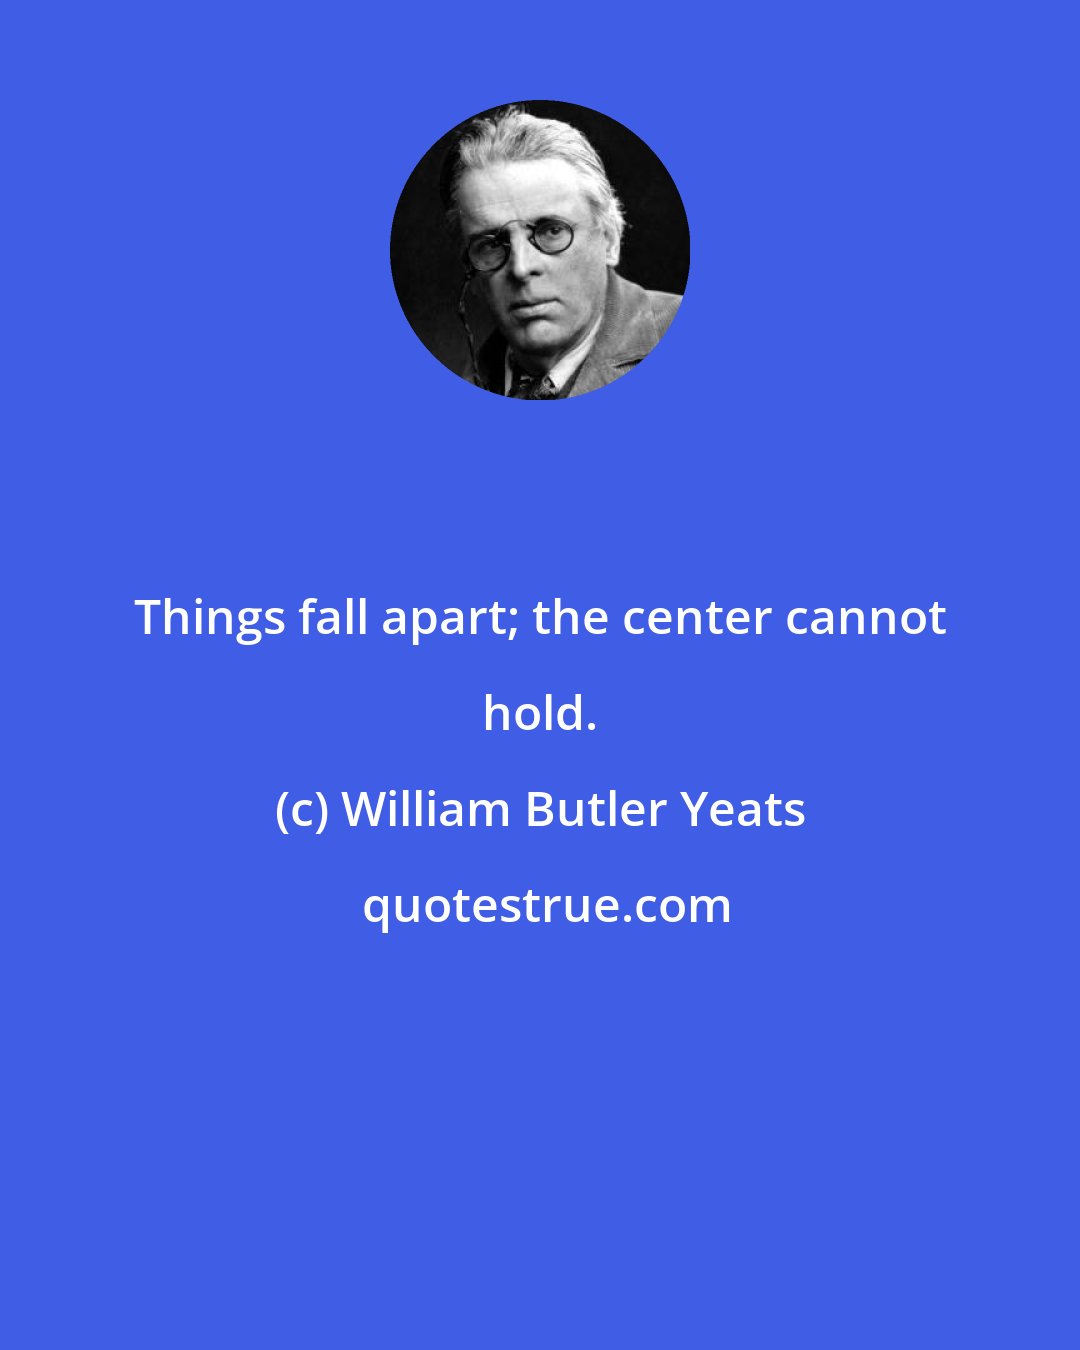 William Butler Yeats: Things fall apart; the center cannot hold.